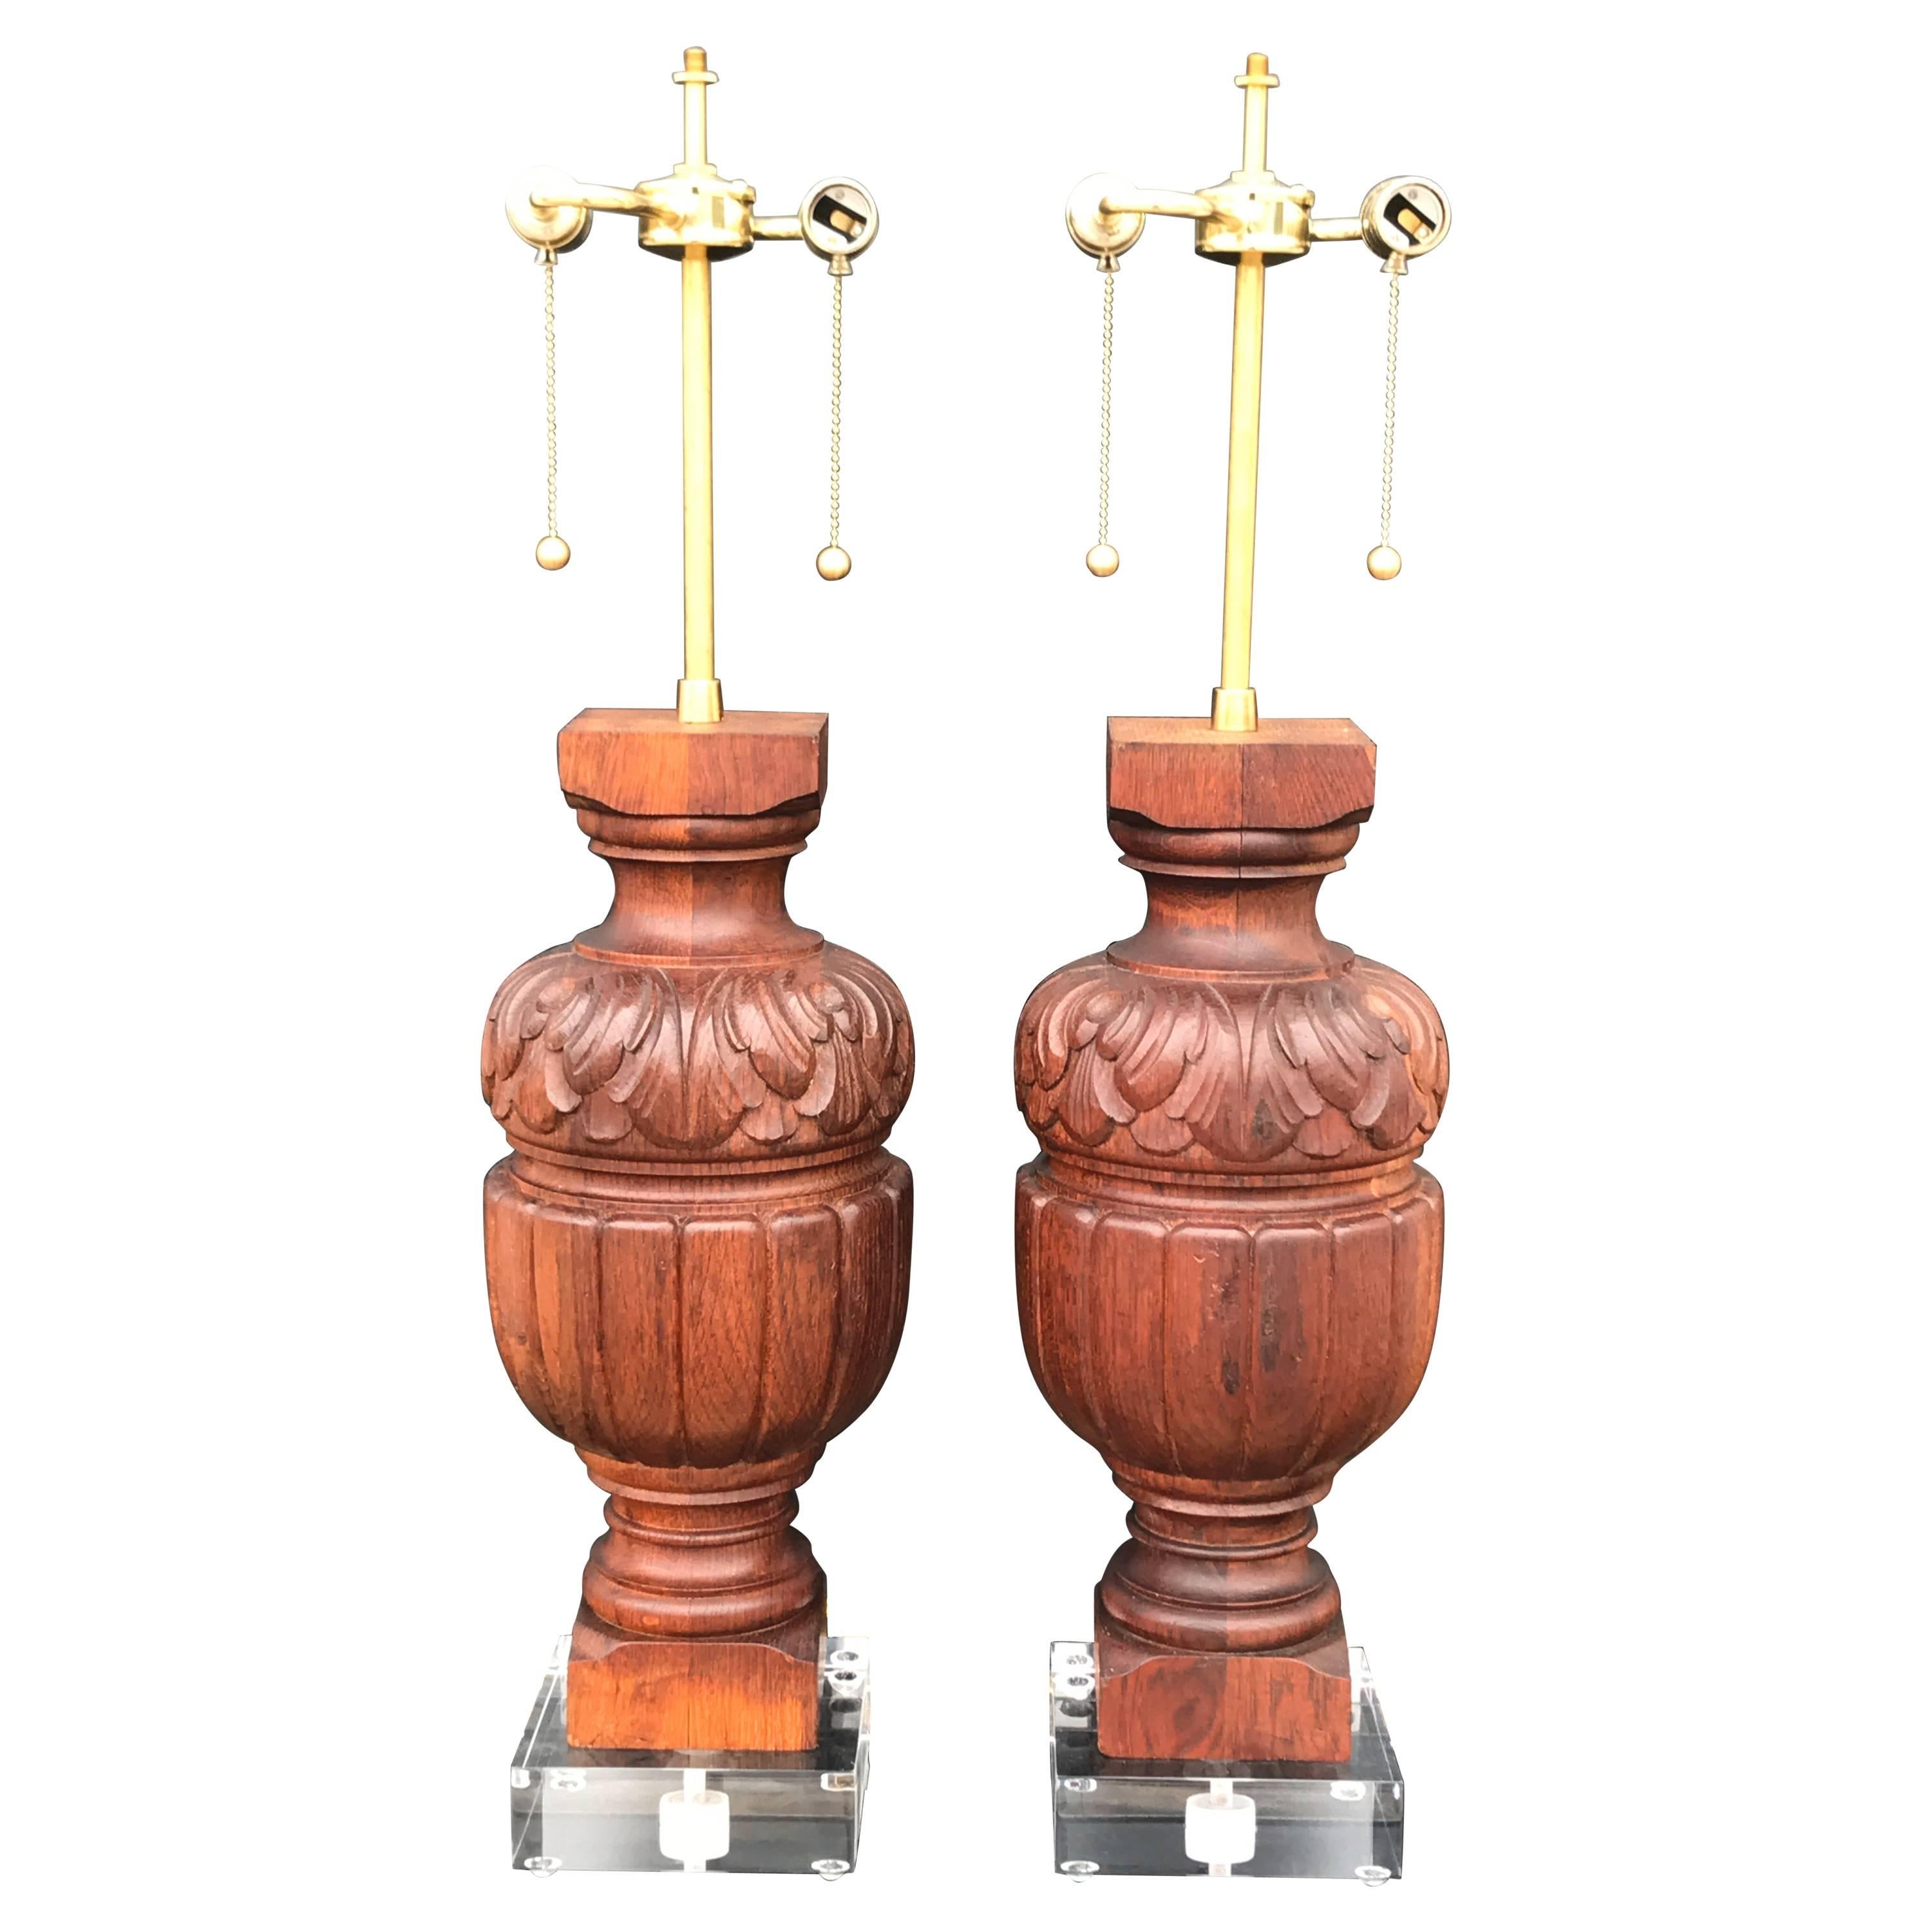 Pair of Architectural Baluster Fragments Mounted as Lamps